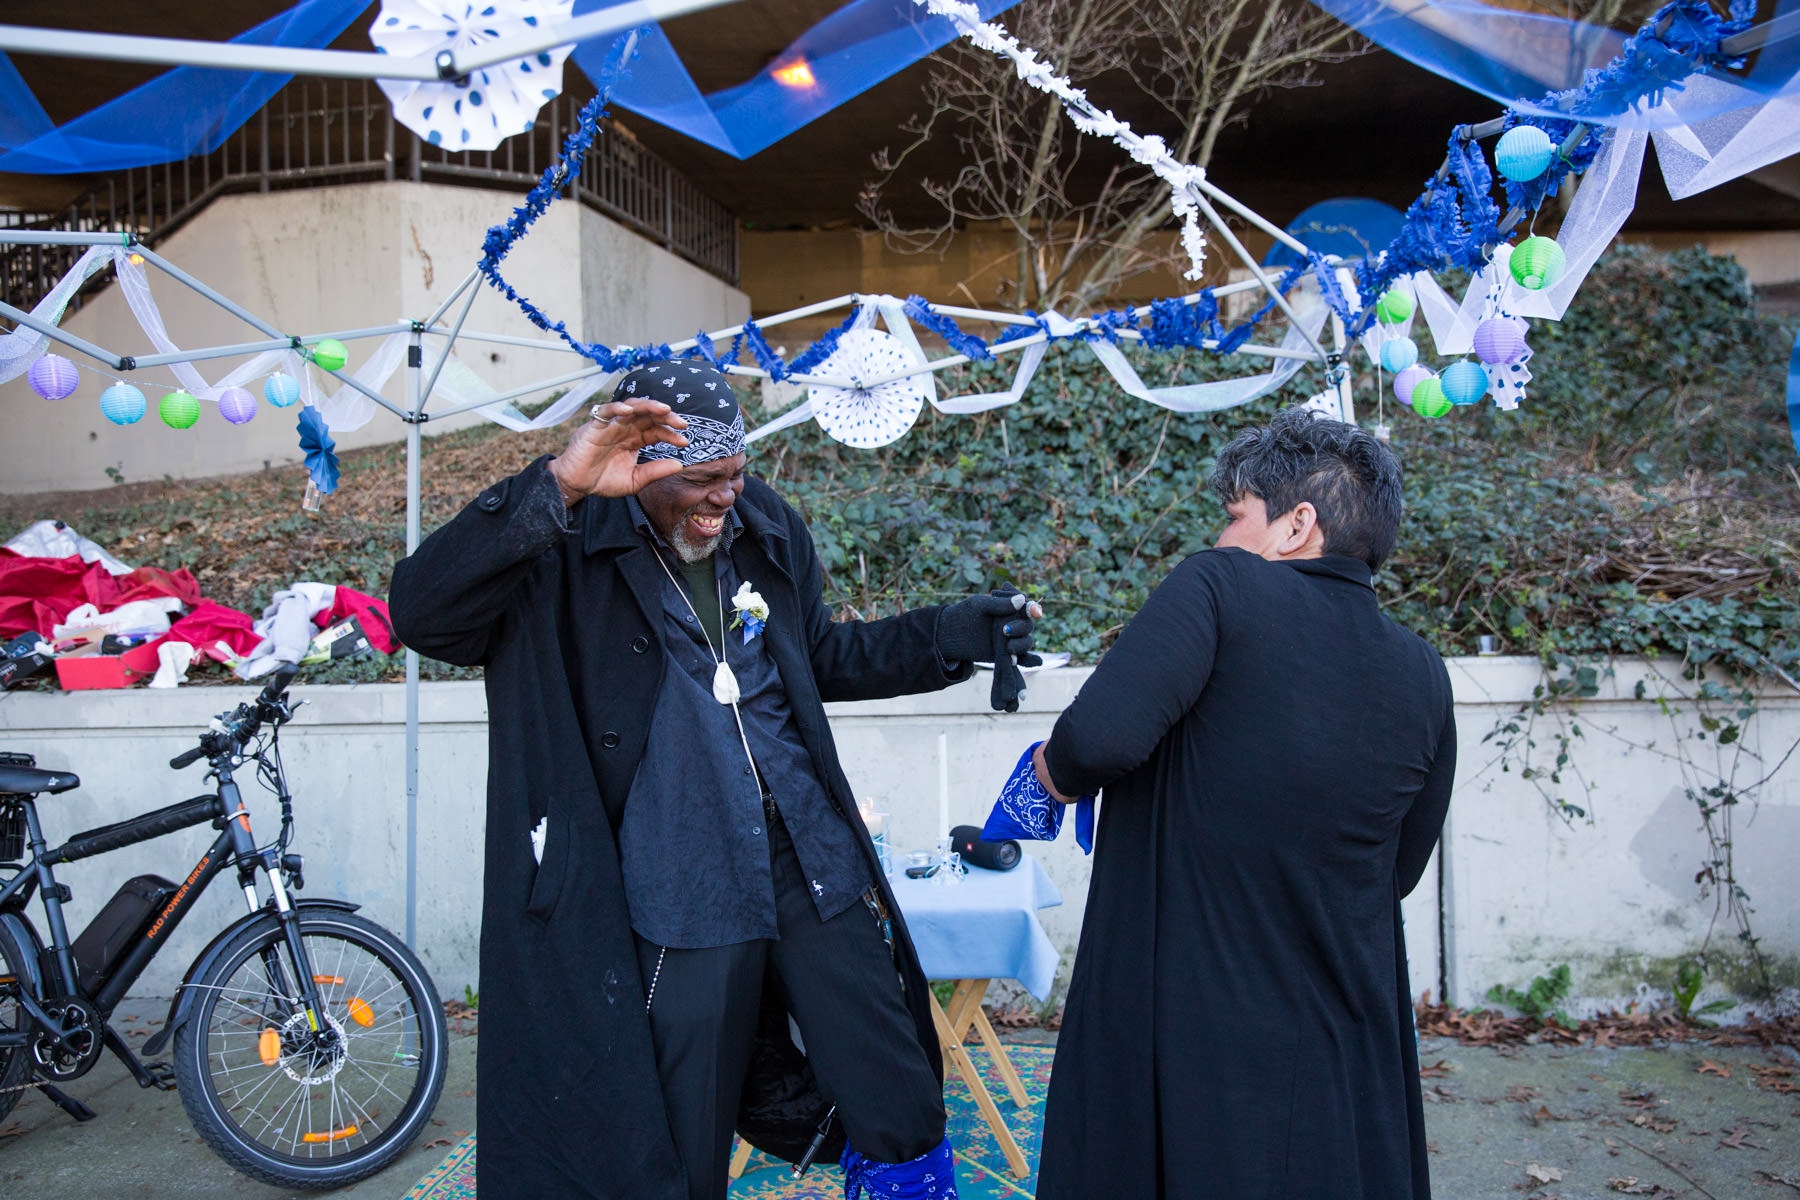 Homeless Vows | NY Times - Ms. Vestal and Mr. Kitcheon dance for the first time as...